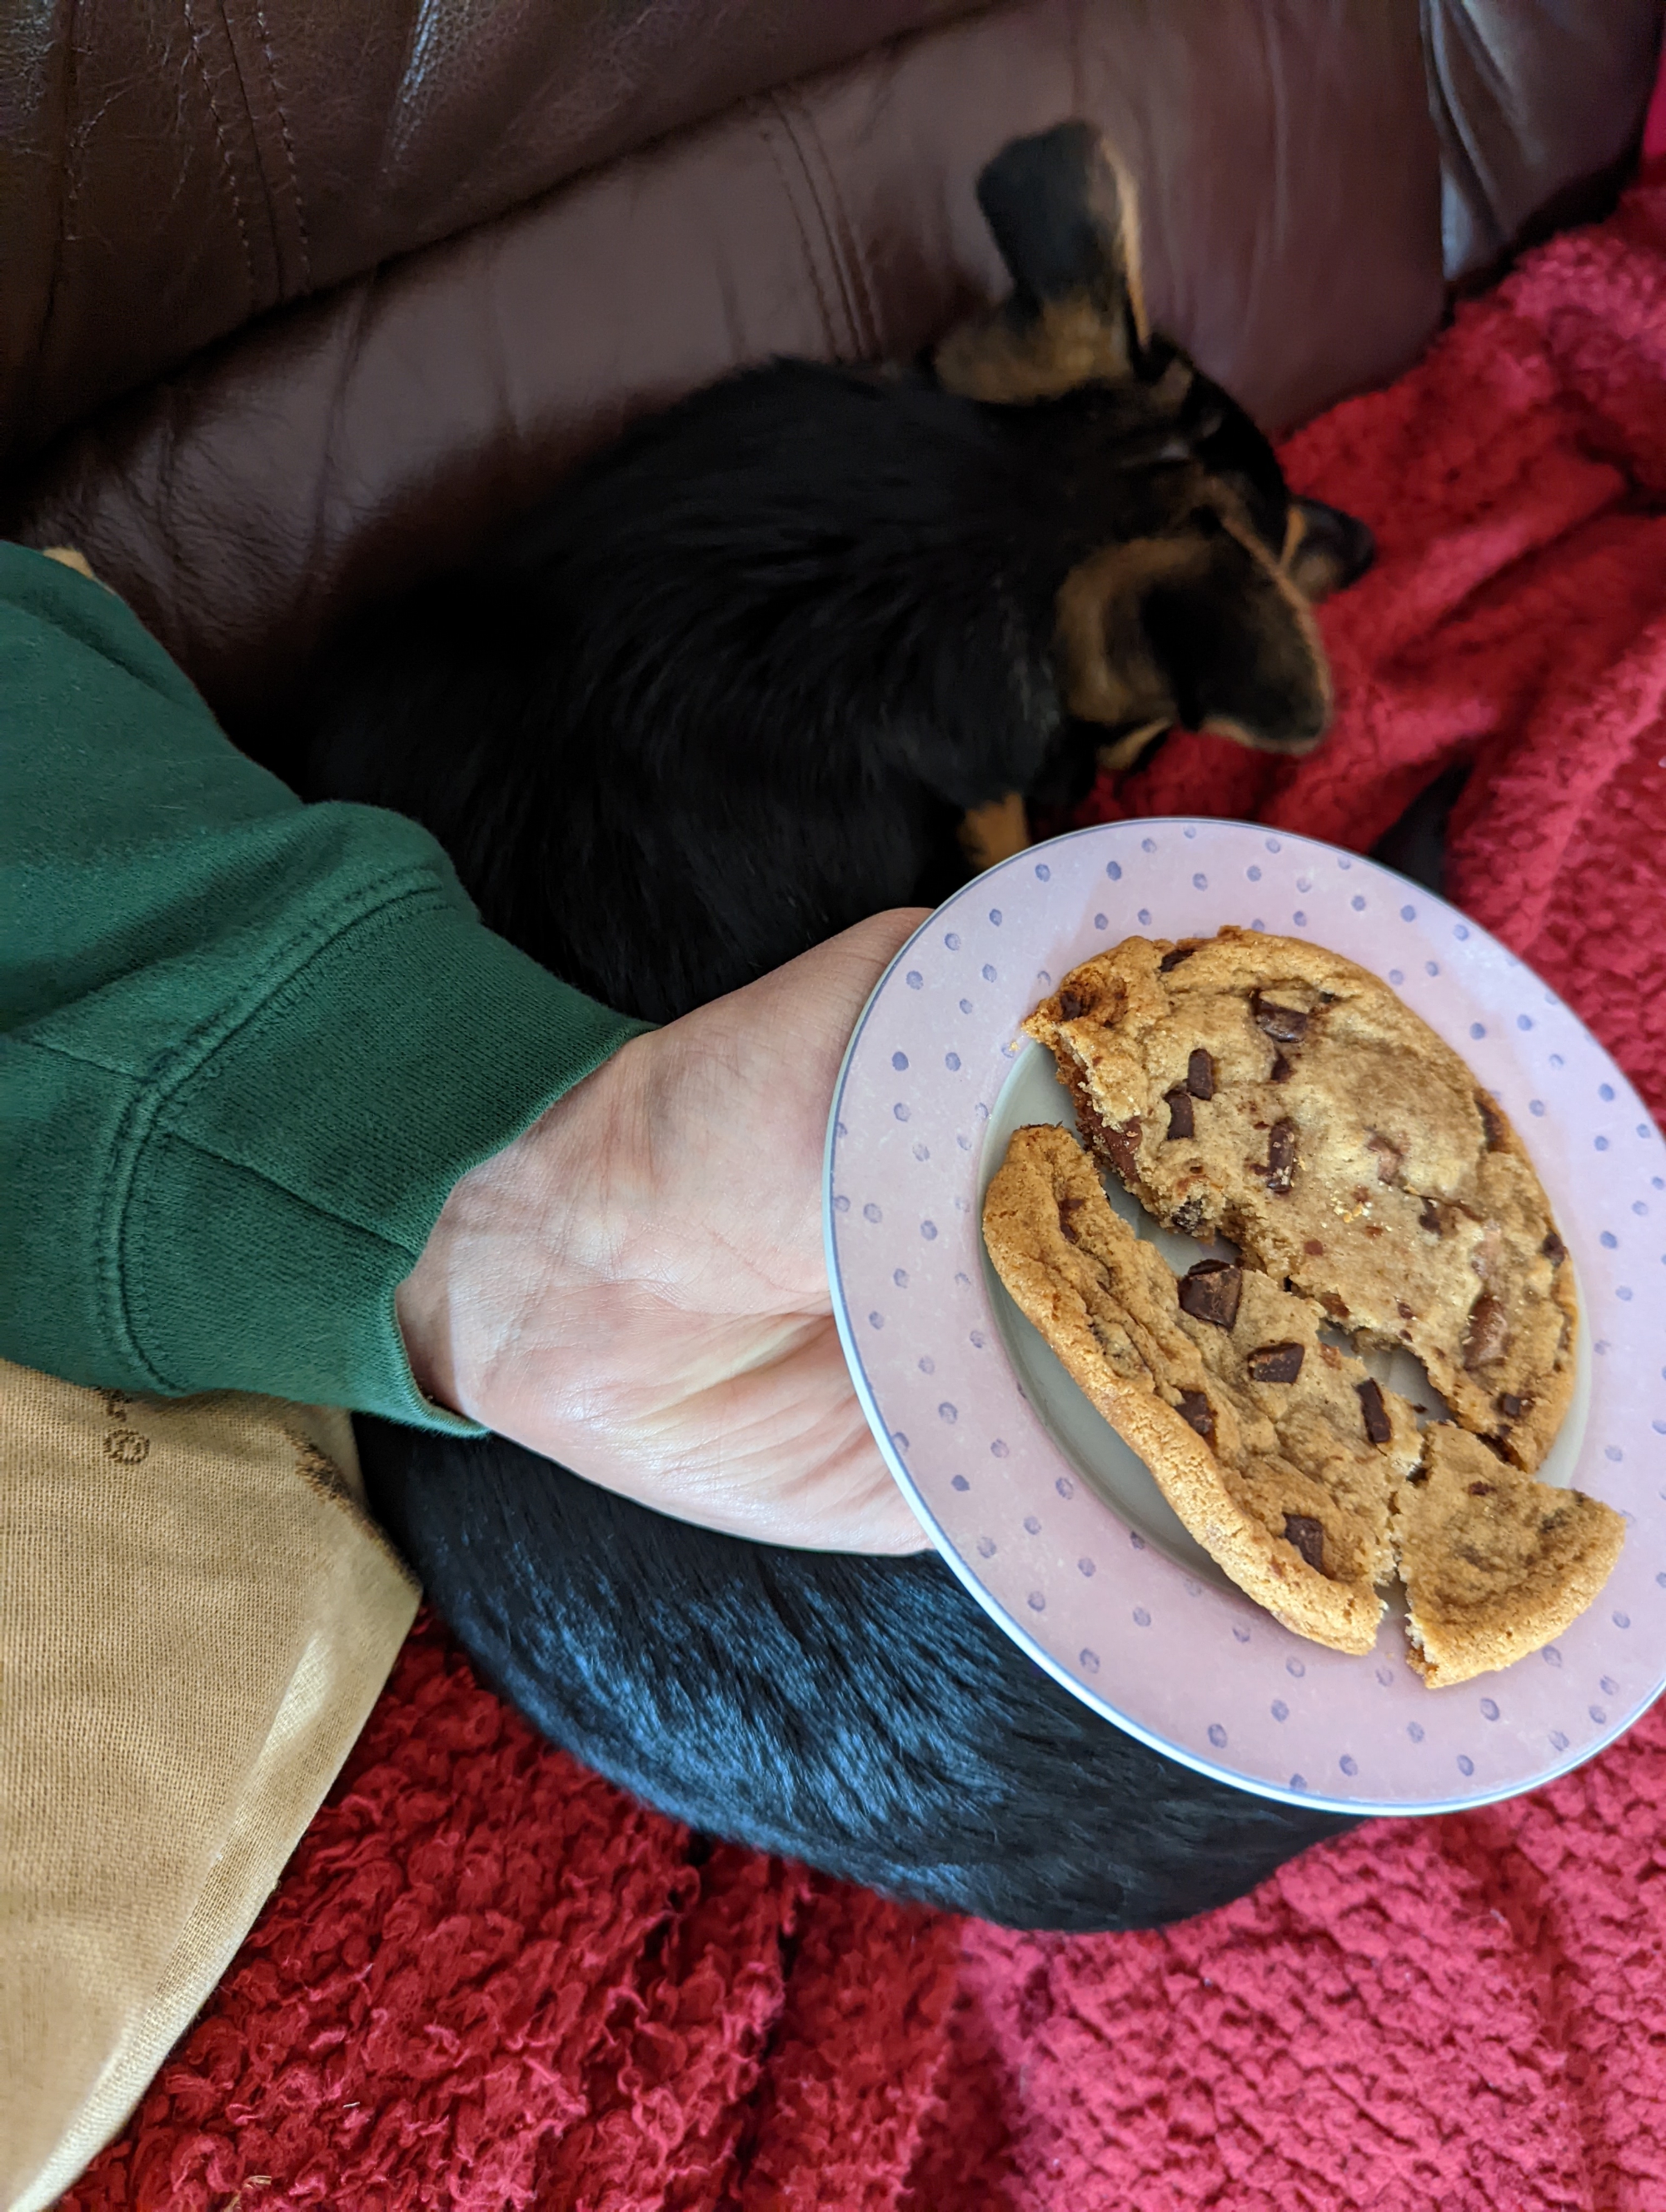 Cookie sleeping on a red blanket, and above, Jamie is holding a Lidl double chocolate cookie on a plate